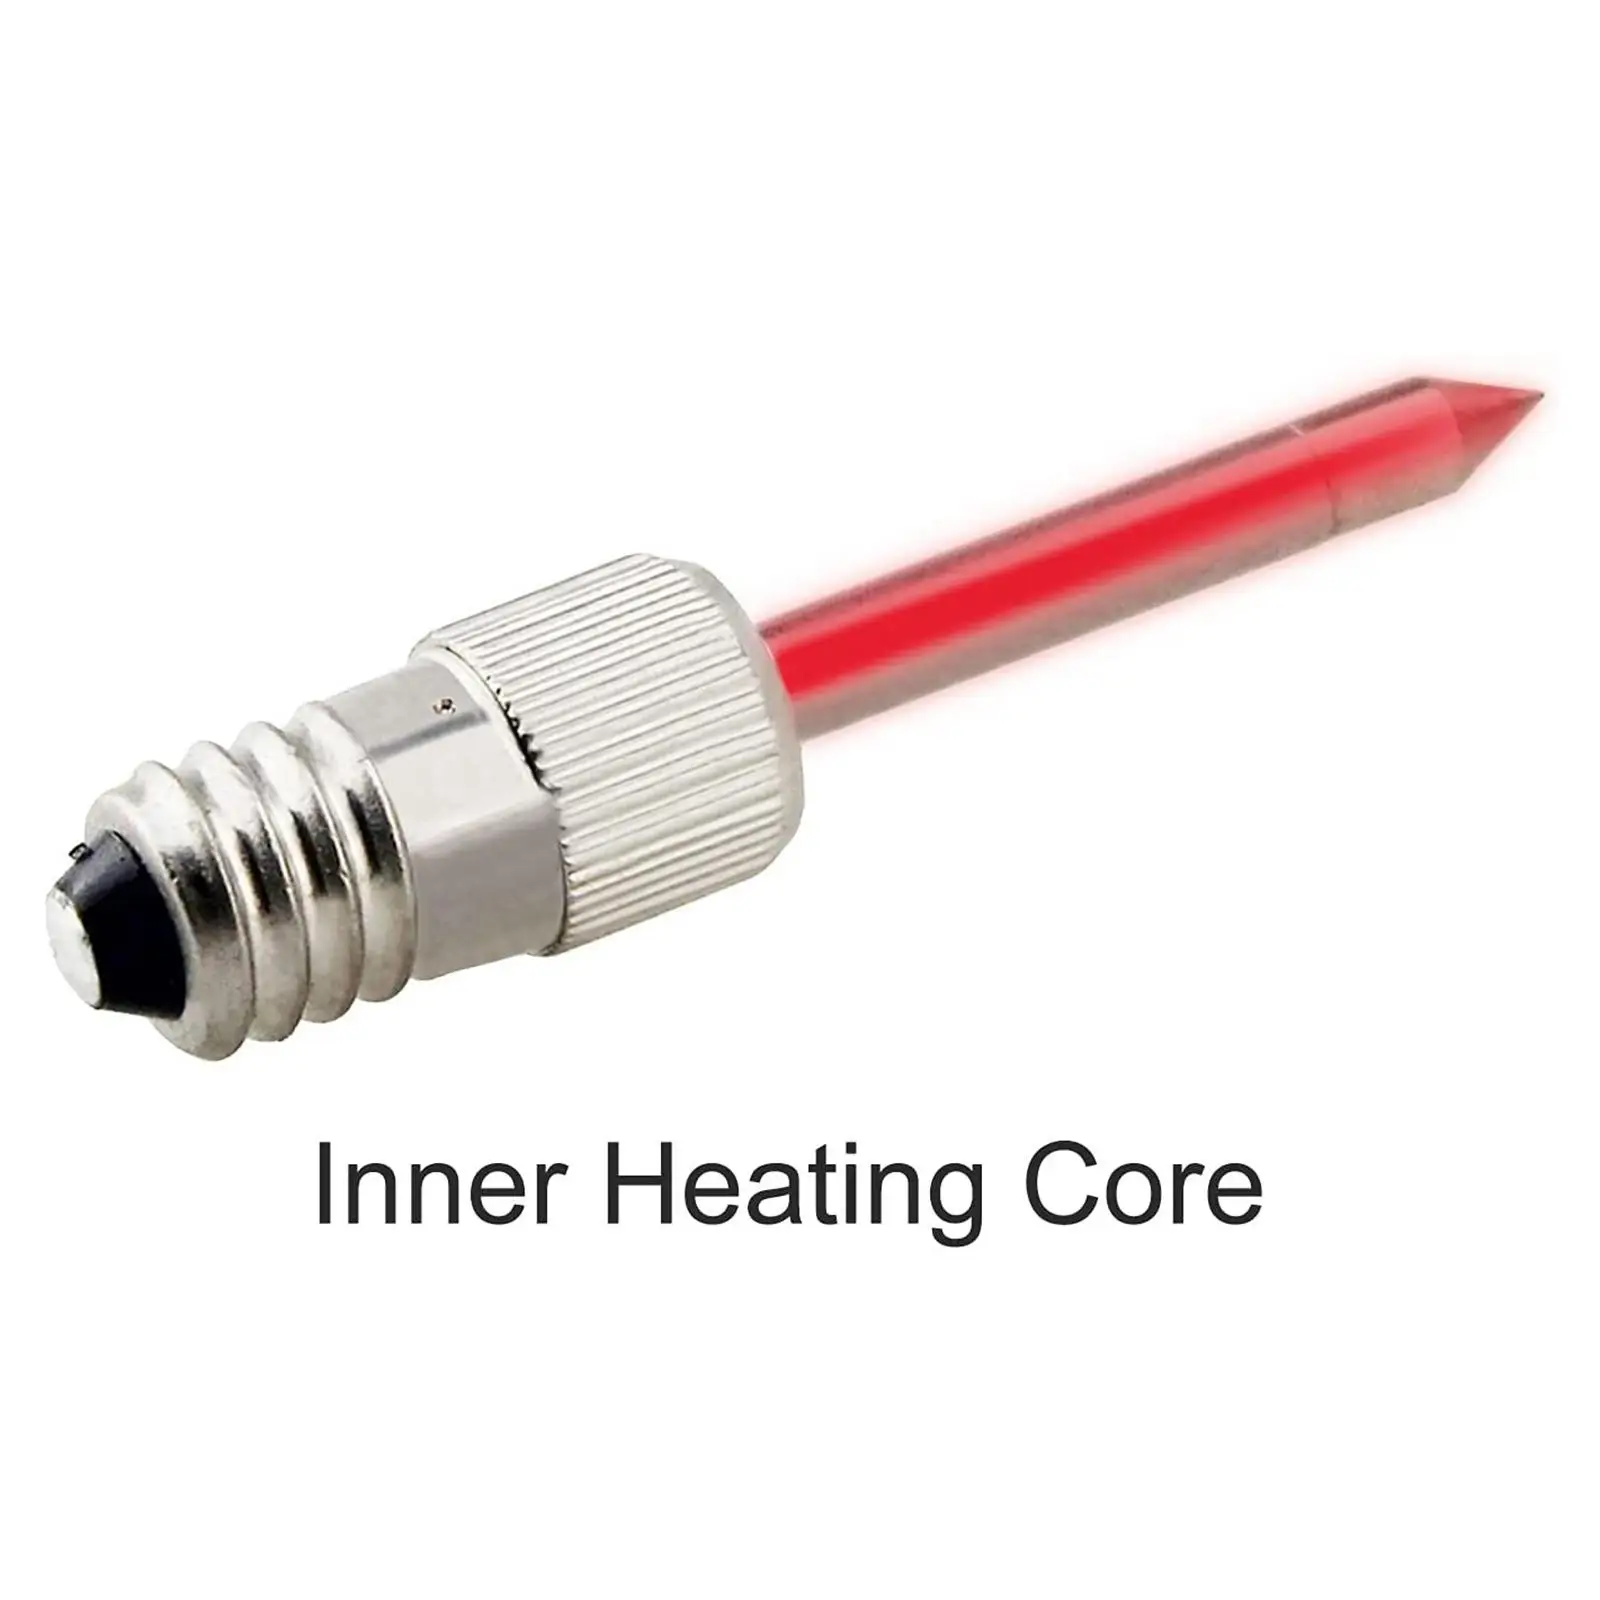 Copper Soldering Iron Tip Threaded Battery USB Sturdy Portable Replacement Tips for Soldering Station Welding Rework Accessories